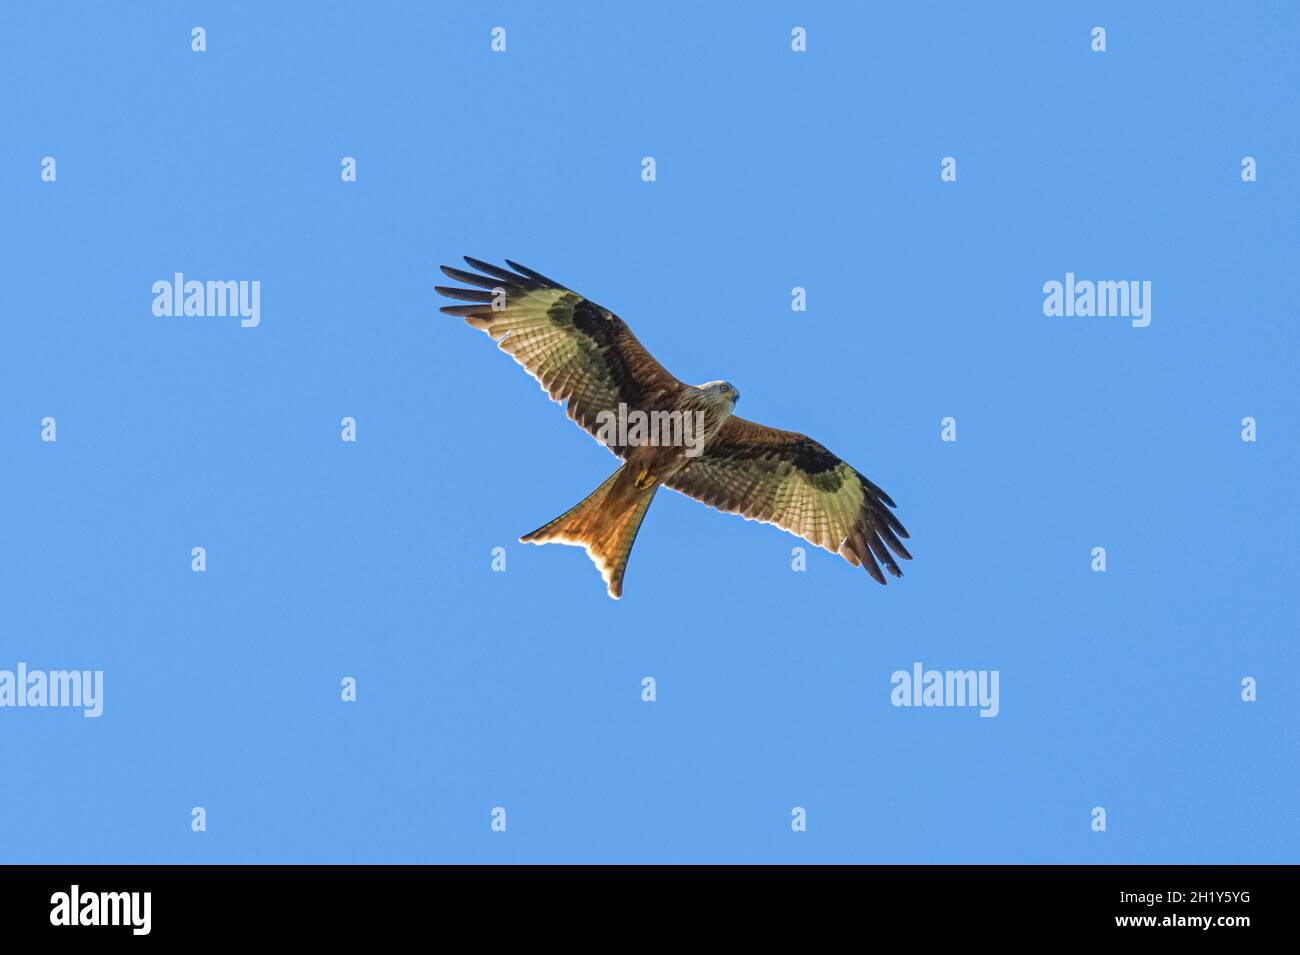 Red kite flying on a clear blue sky Stock Photo